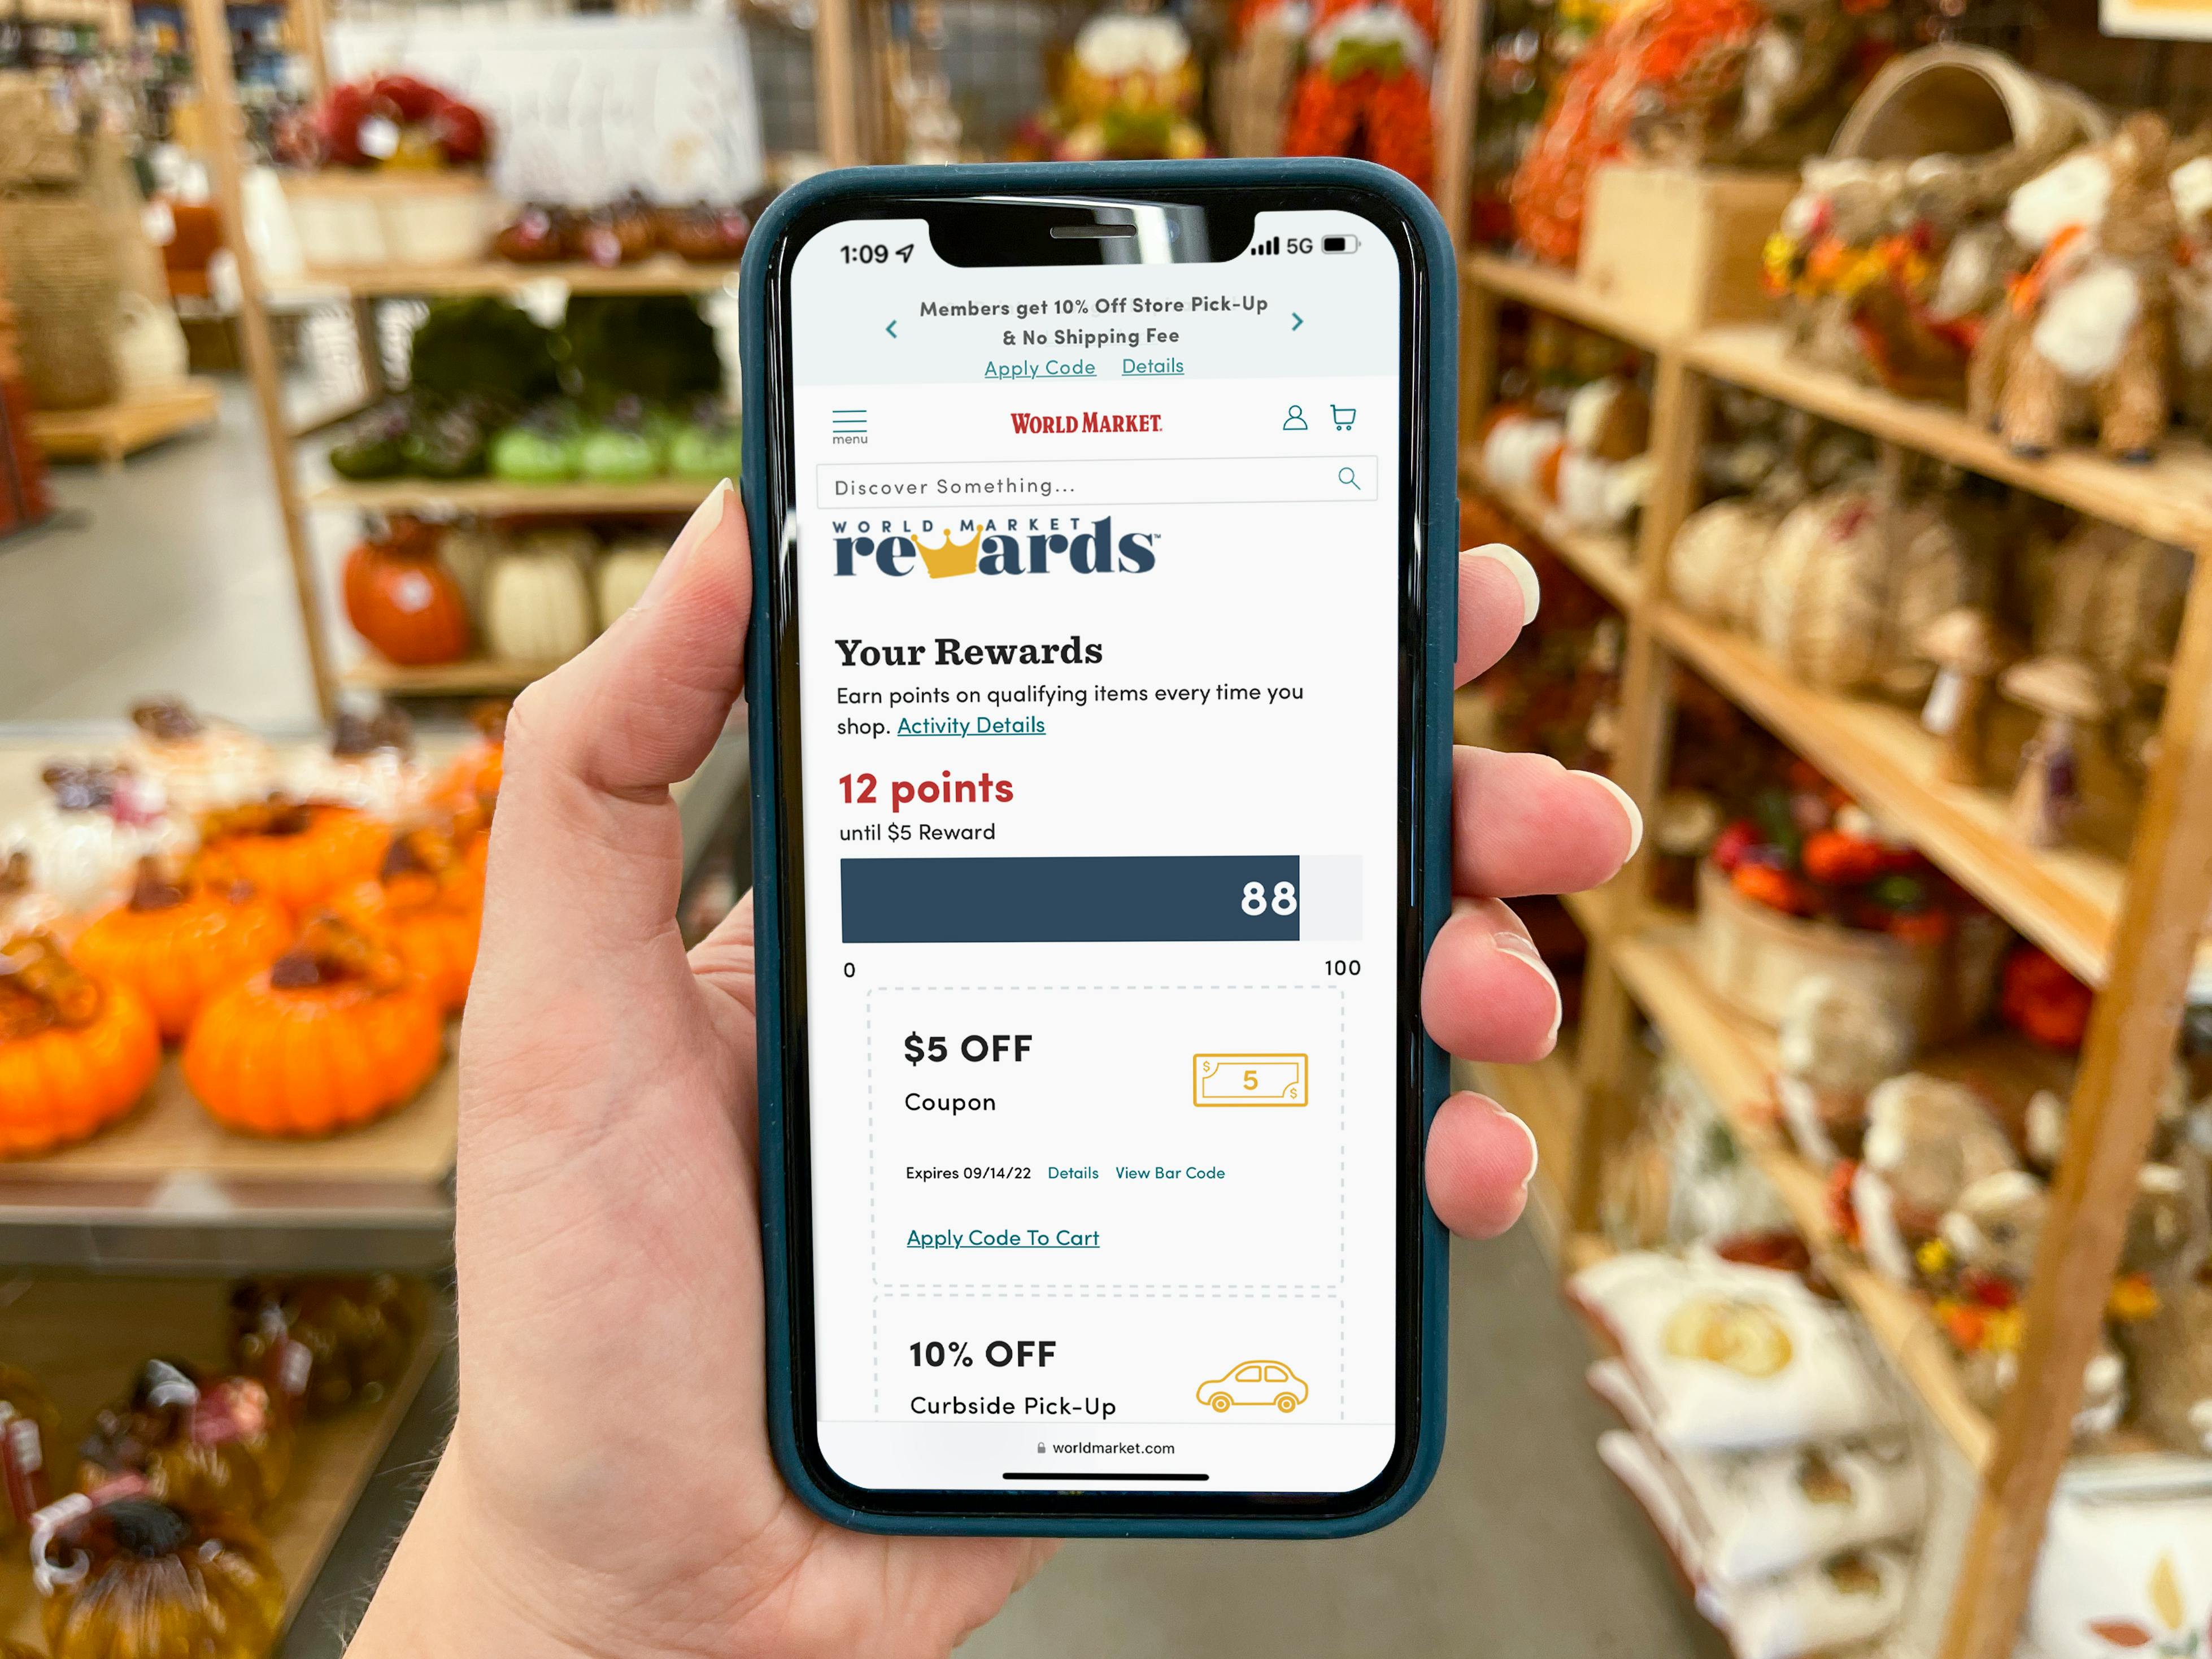 World Market rewards points on a cell phone.